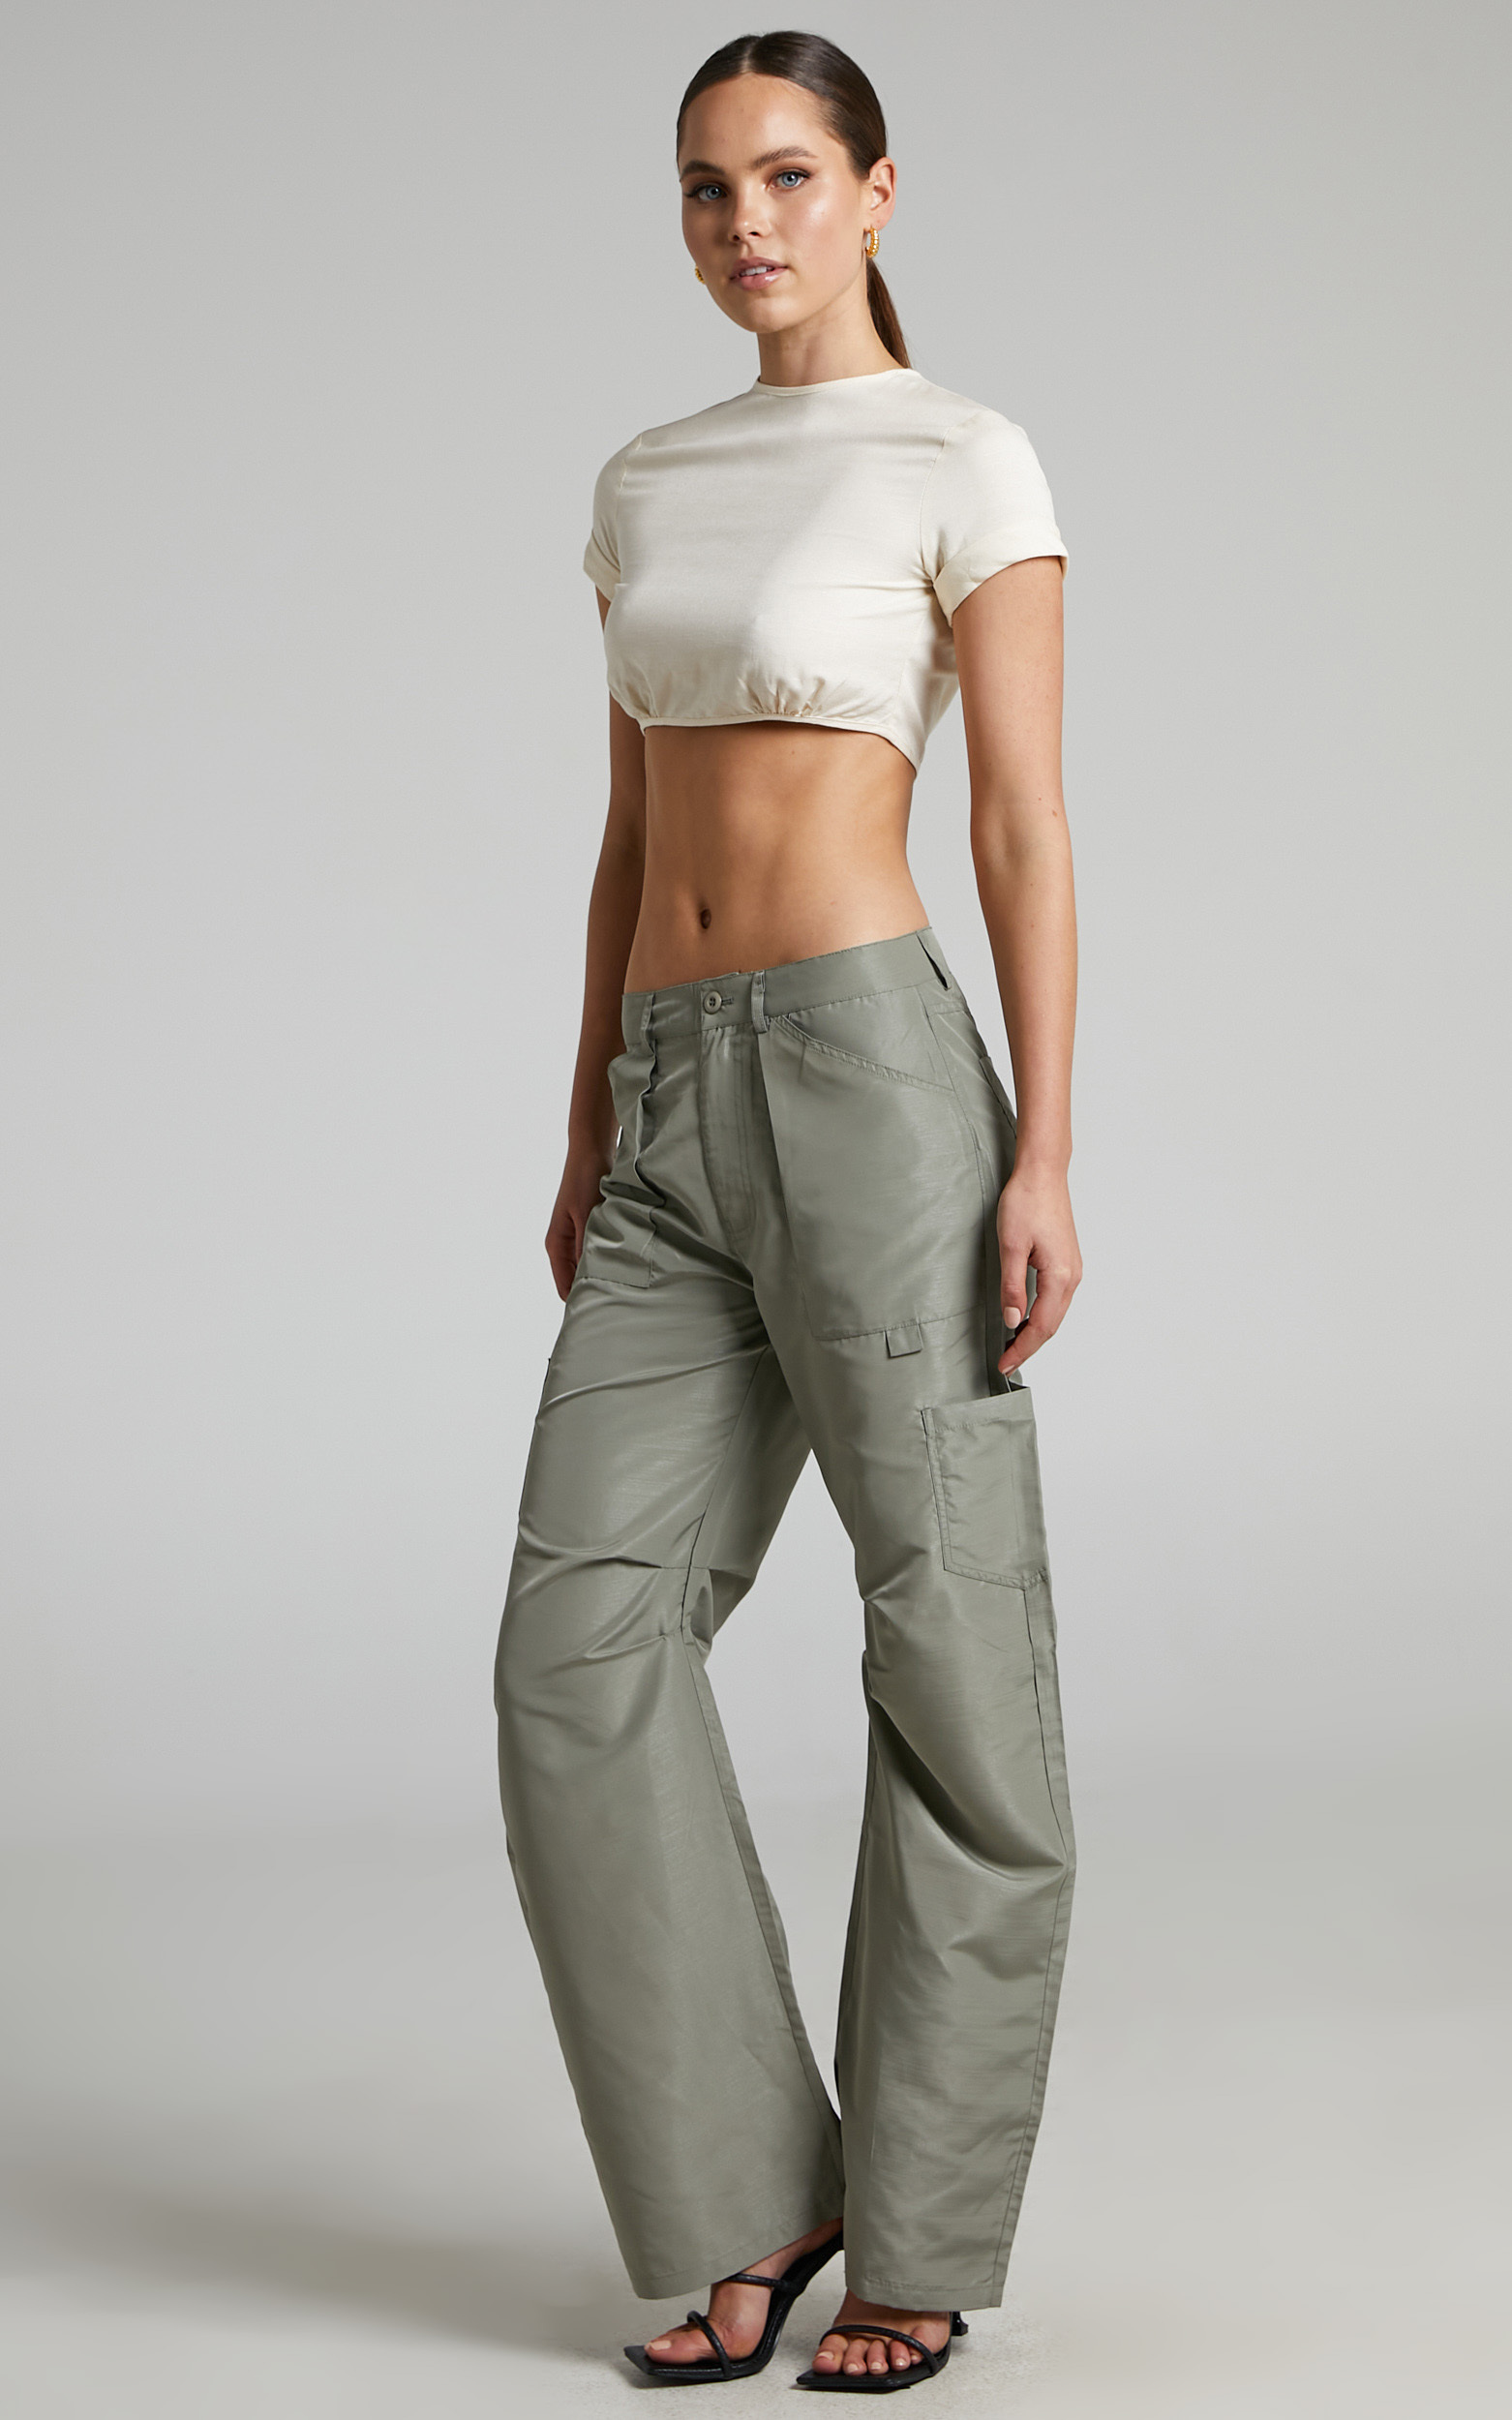 Lioness - Miami Vice Swish Pants in Sage - L, GRN1, hi-res image number null